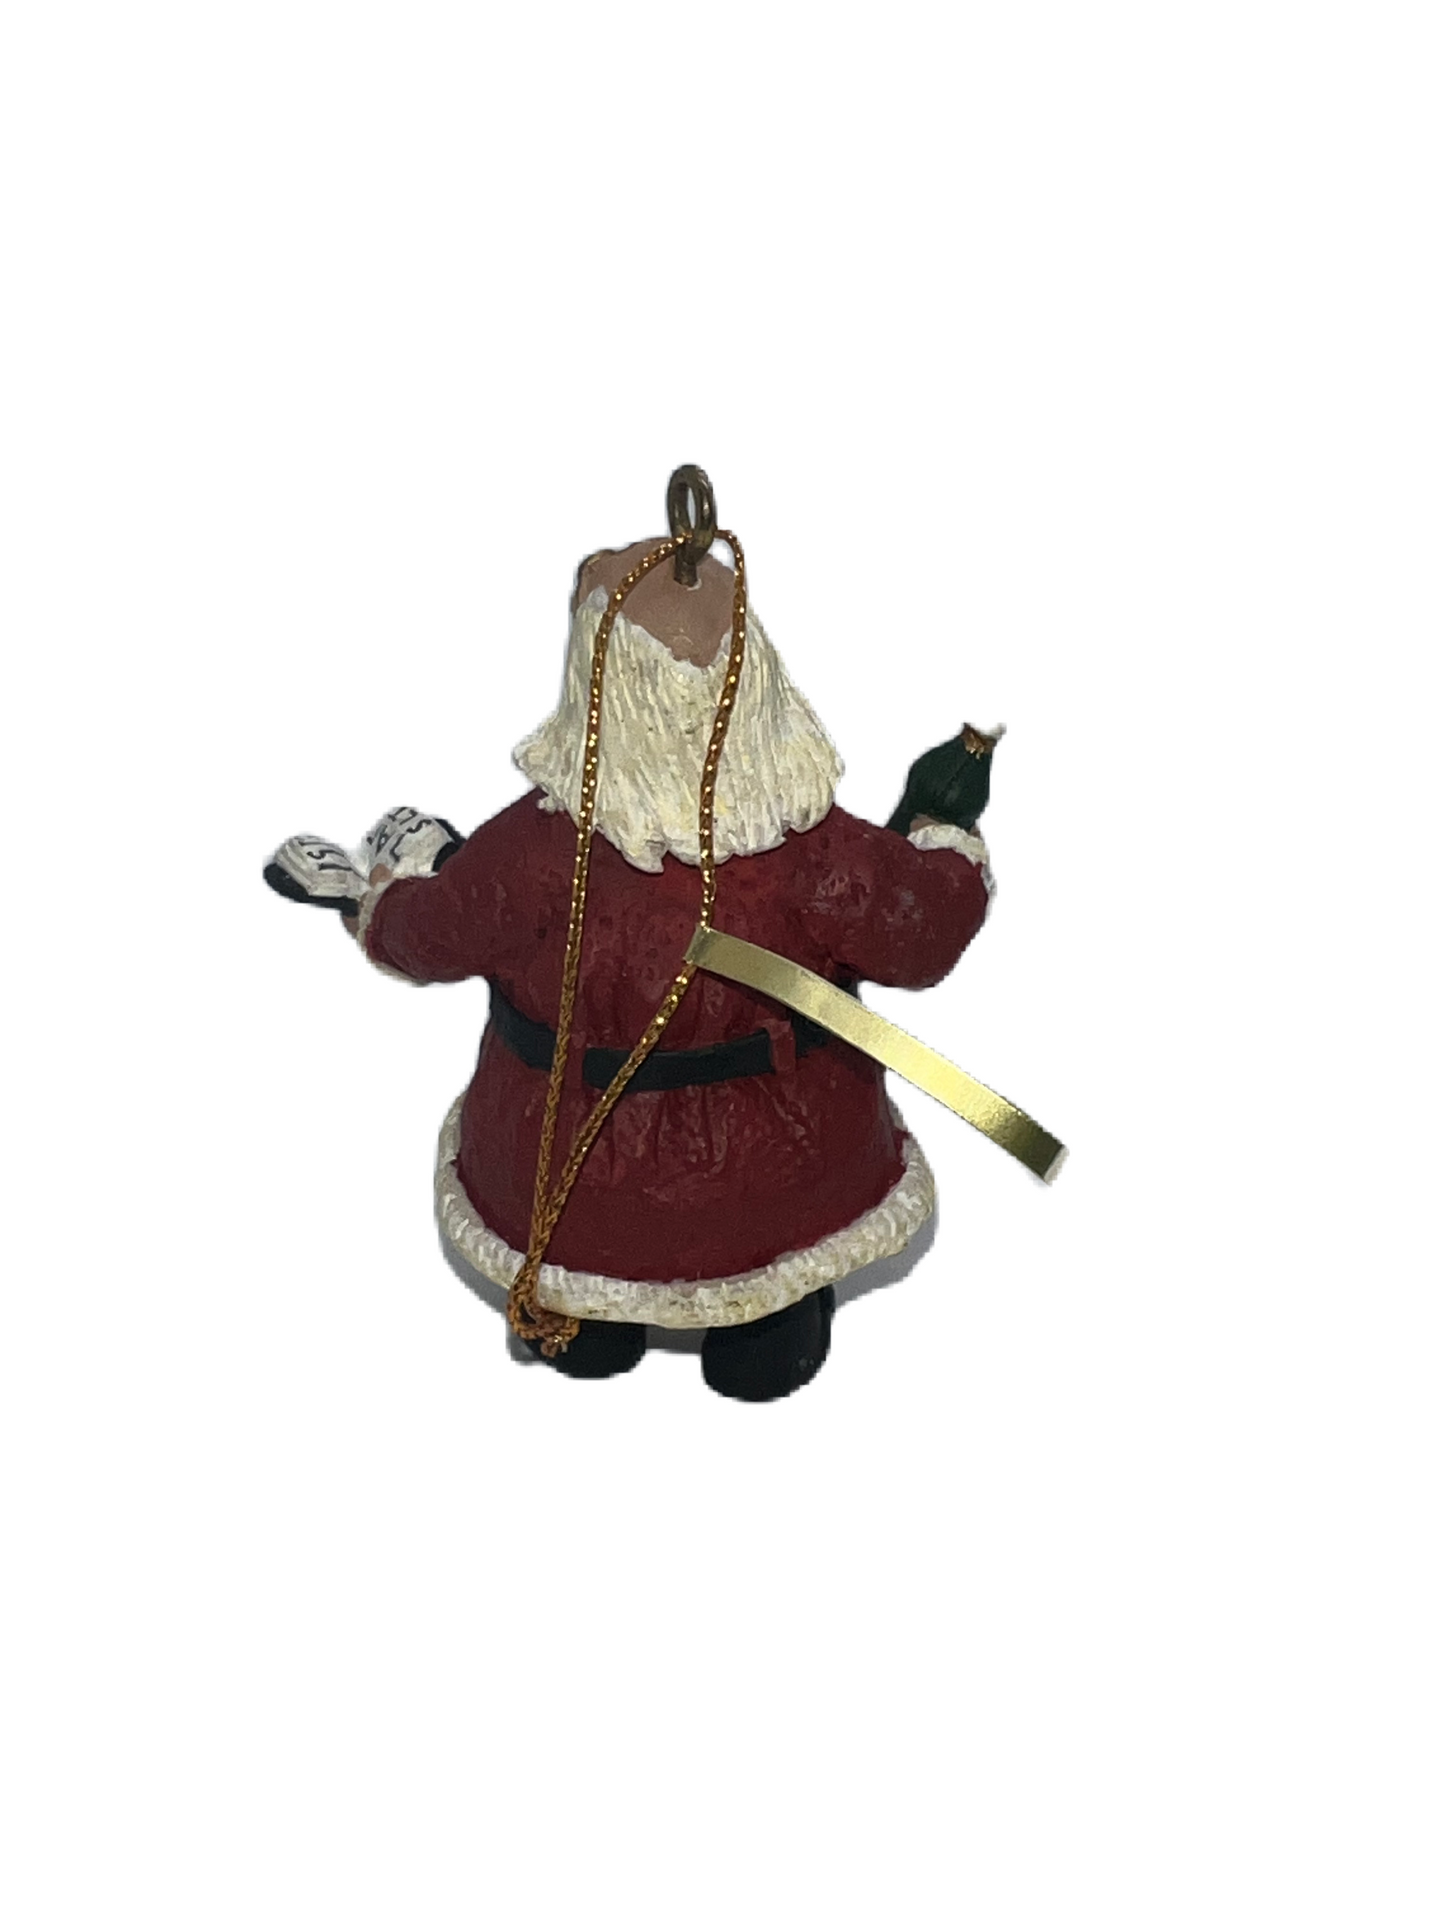 Duncan Royale Santa 1 Collection Limited Edition 1991 Christmas Tree Decor Ornaments